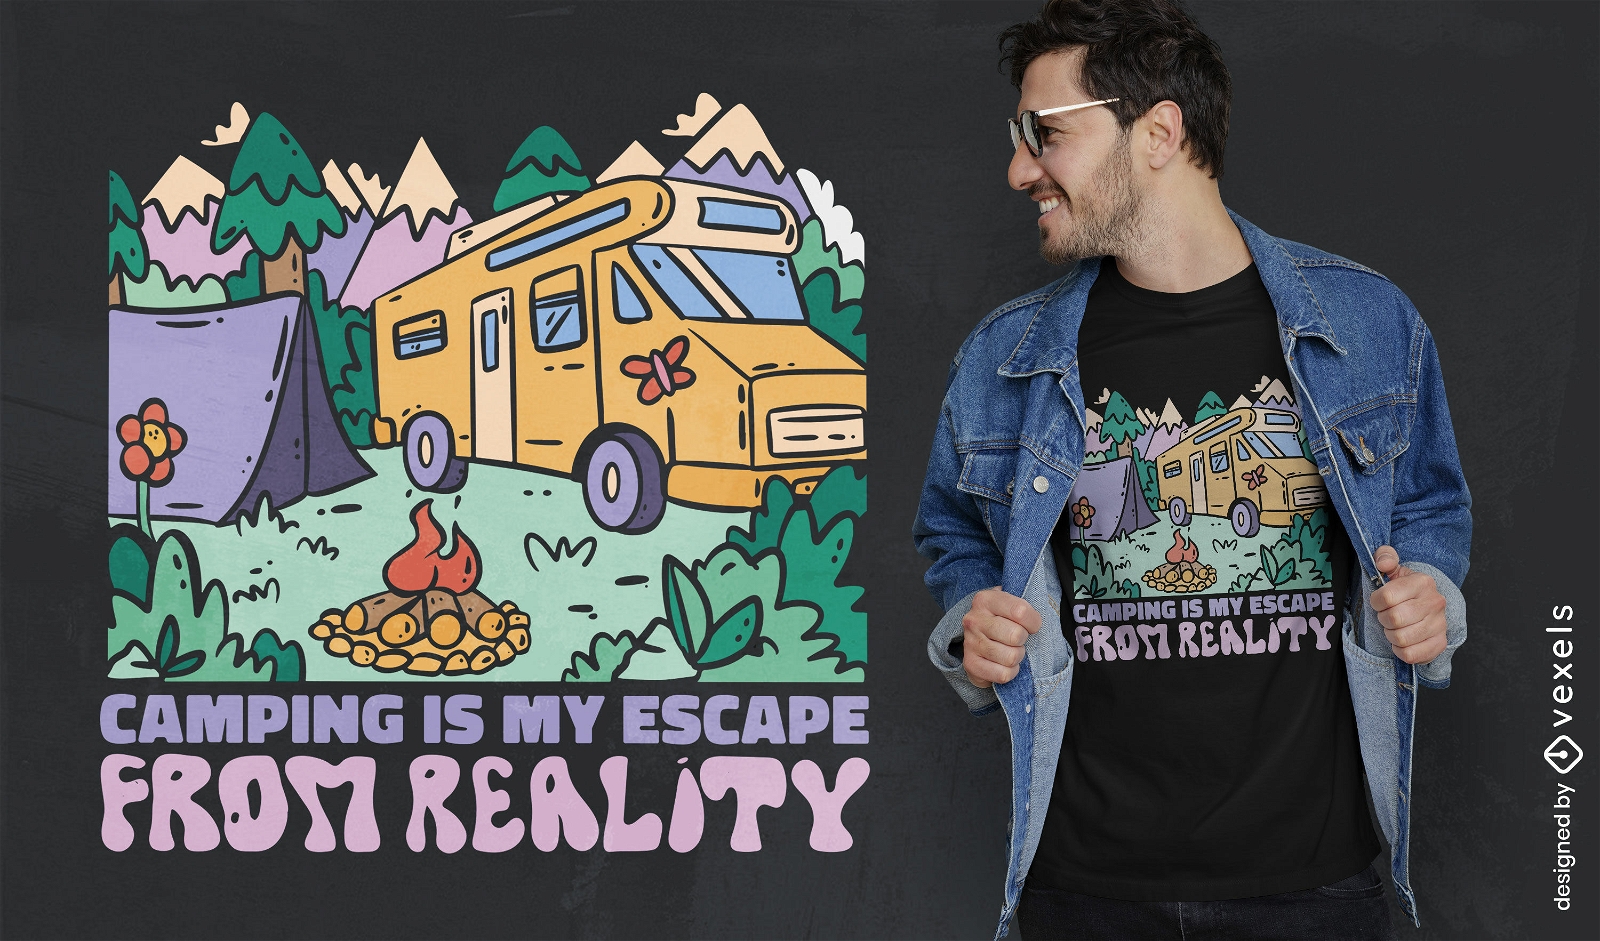 Groovy camping t-shirt design